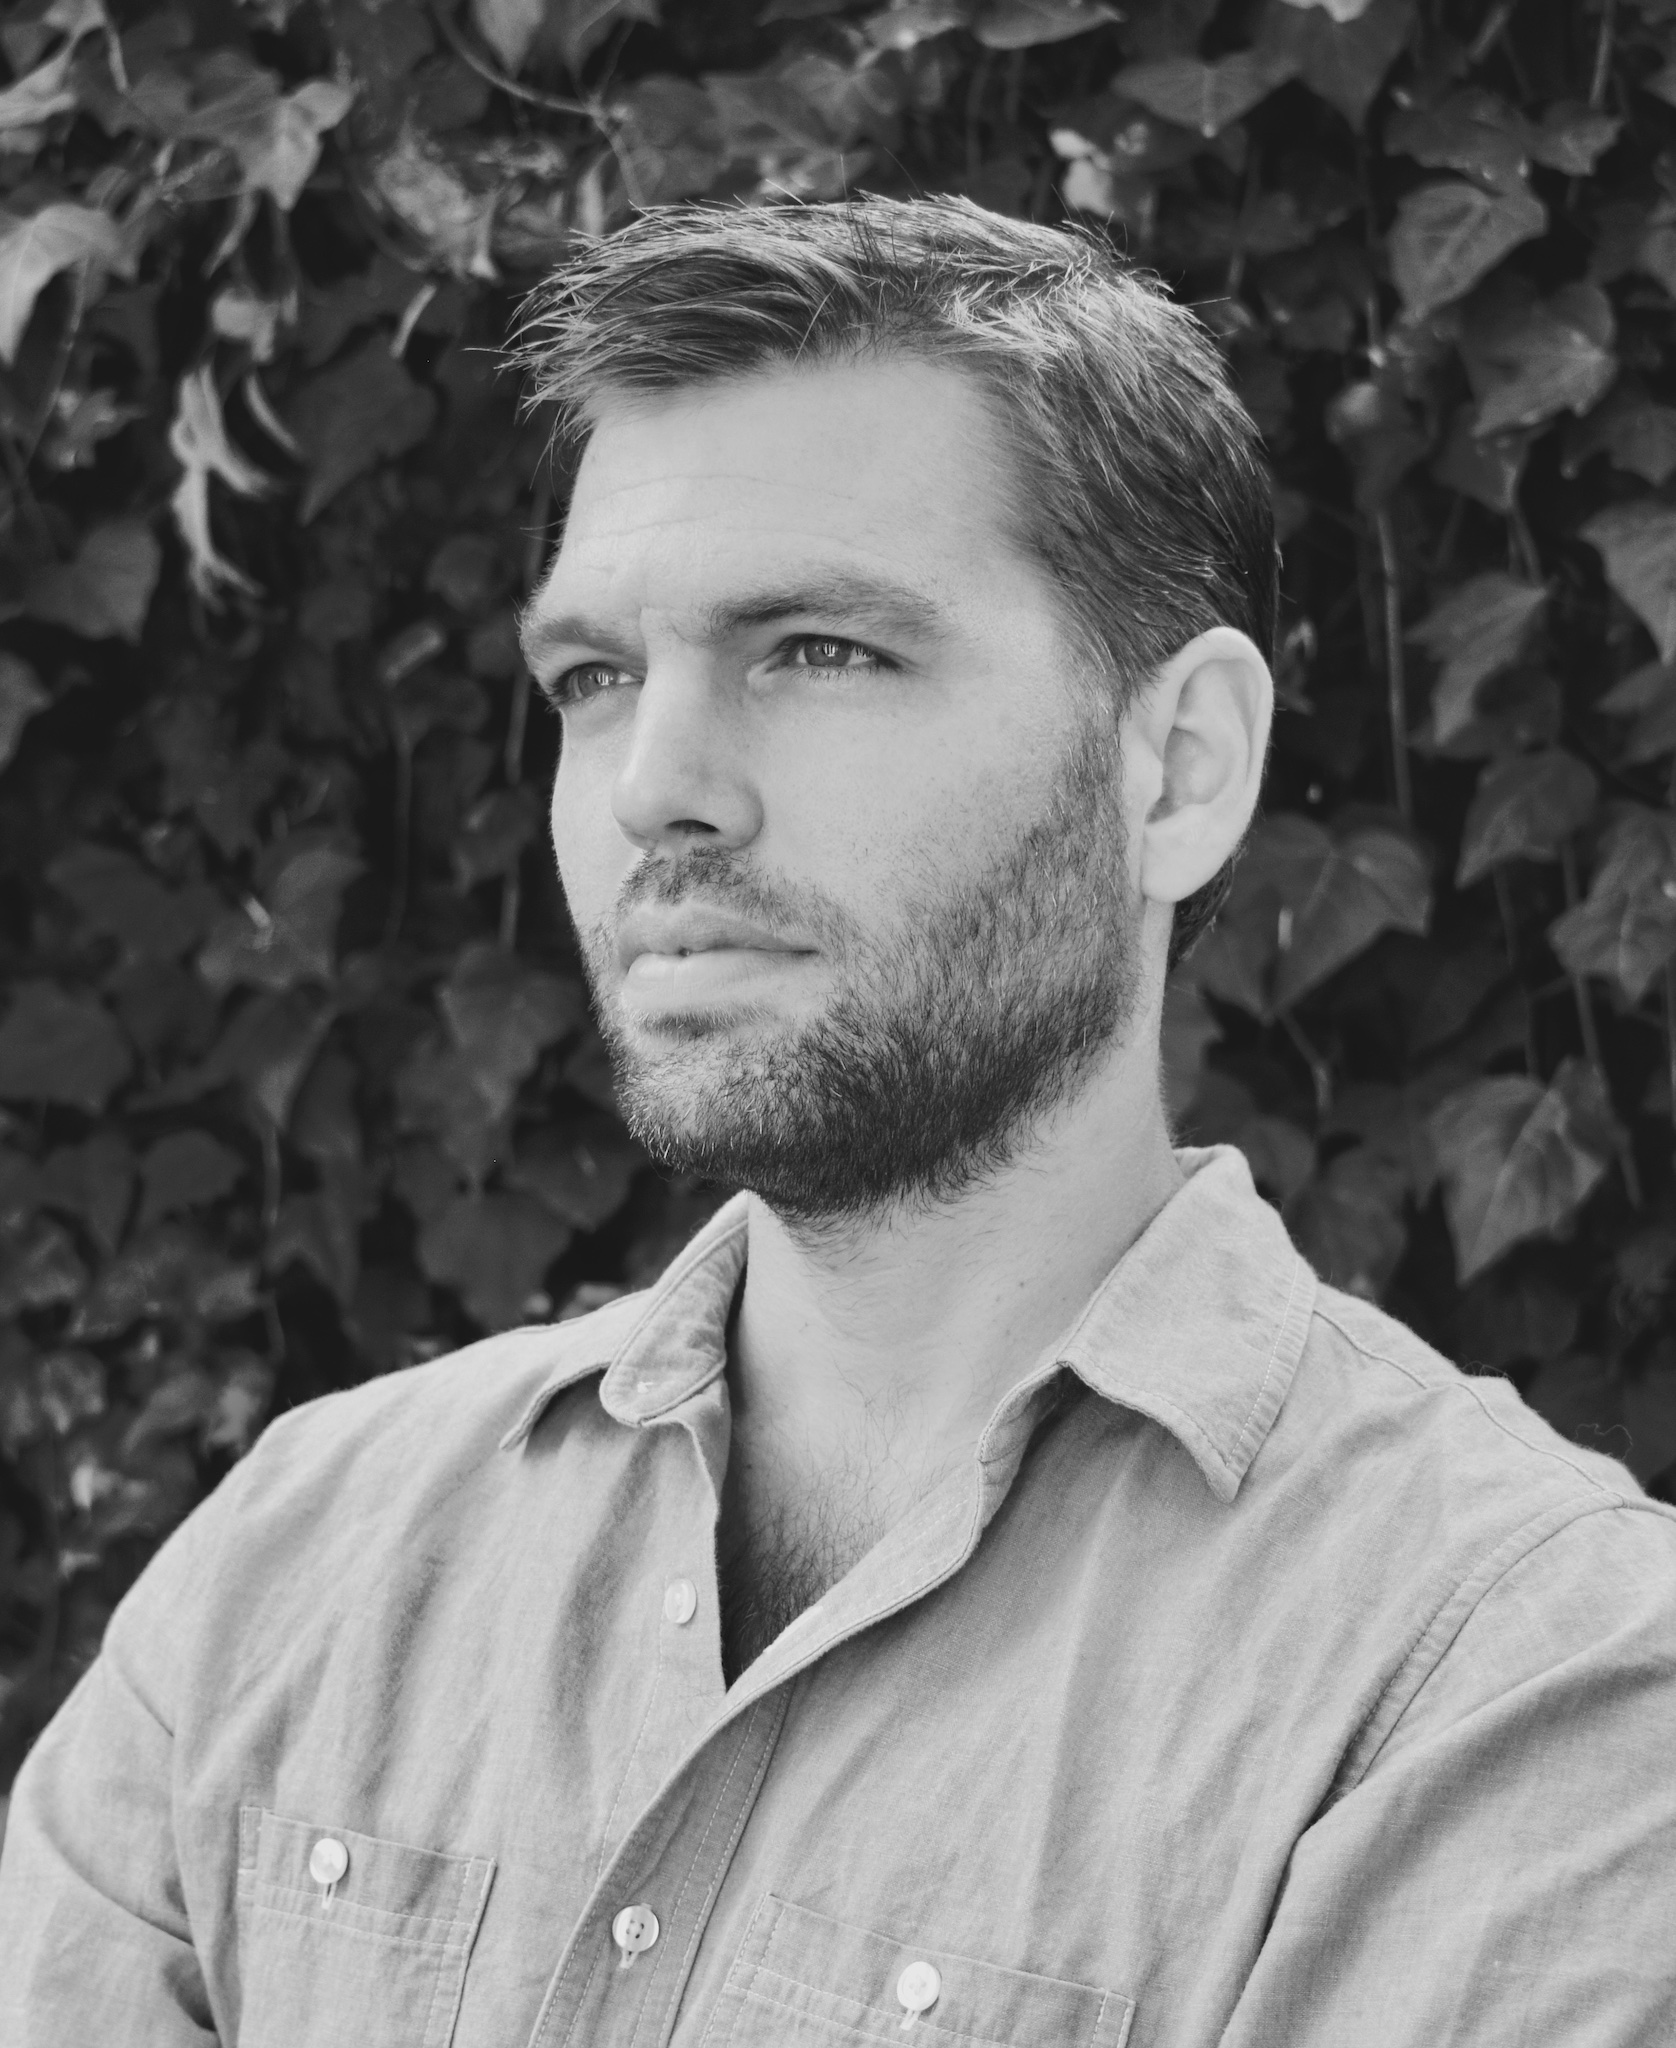 Kirk Johnson, a white man with short hair and a close-cropped beard, poses in a black and white photo. he's wearing a button-down and standing in front of an ivy covered wall.